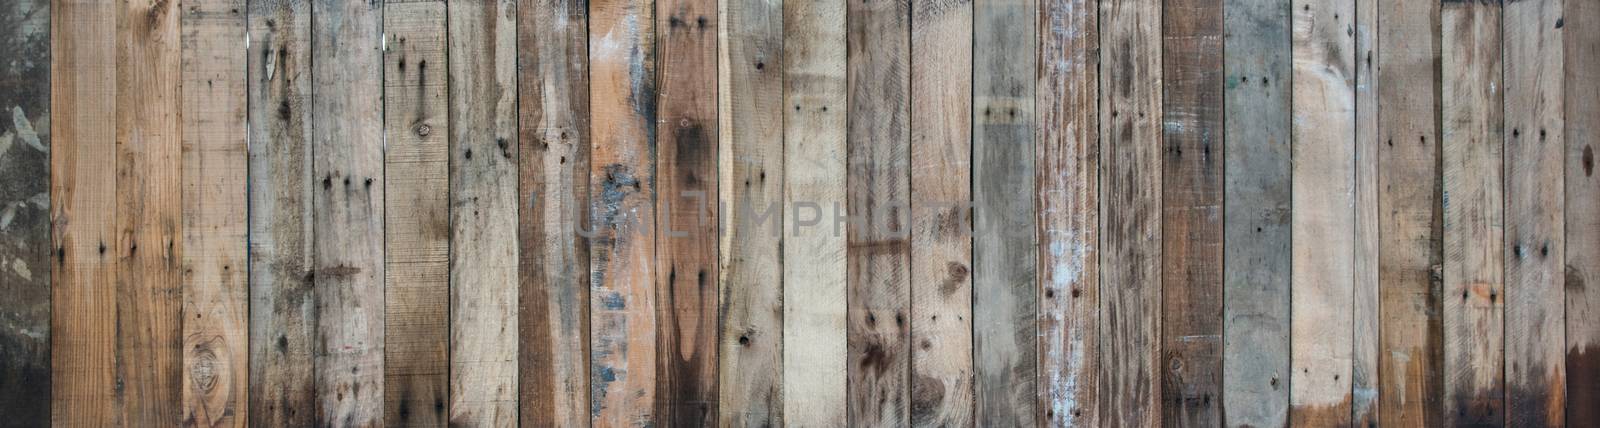 wood brown aged plank texture